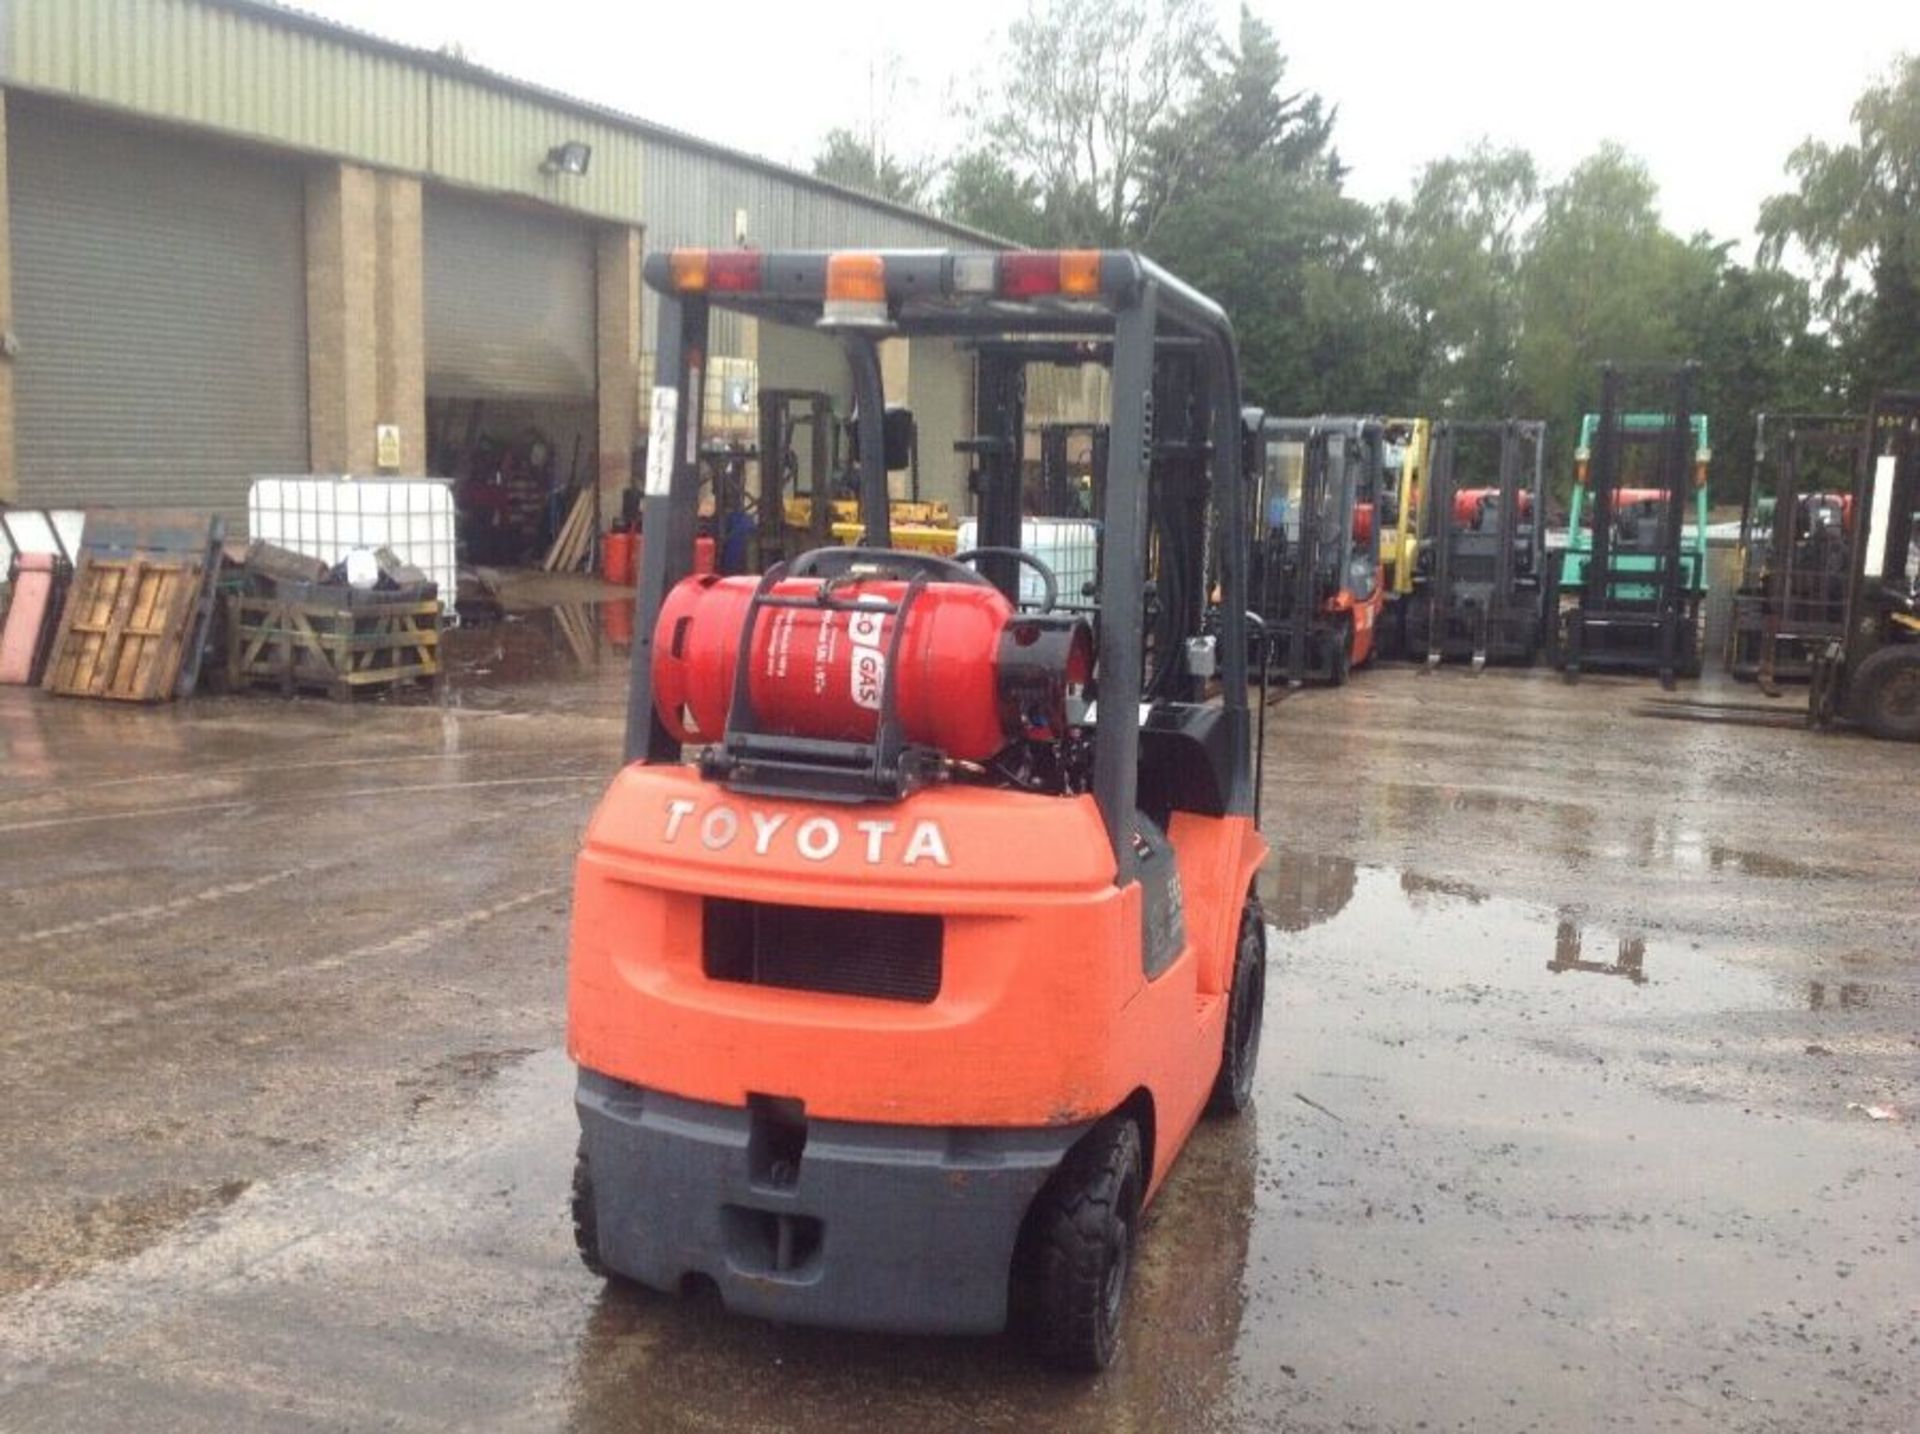 Toyota 1.5 ton gas forklift - Image 5 of 5